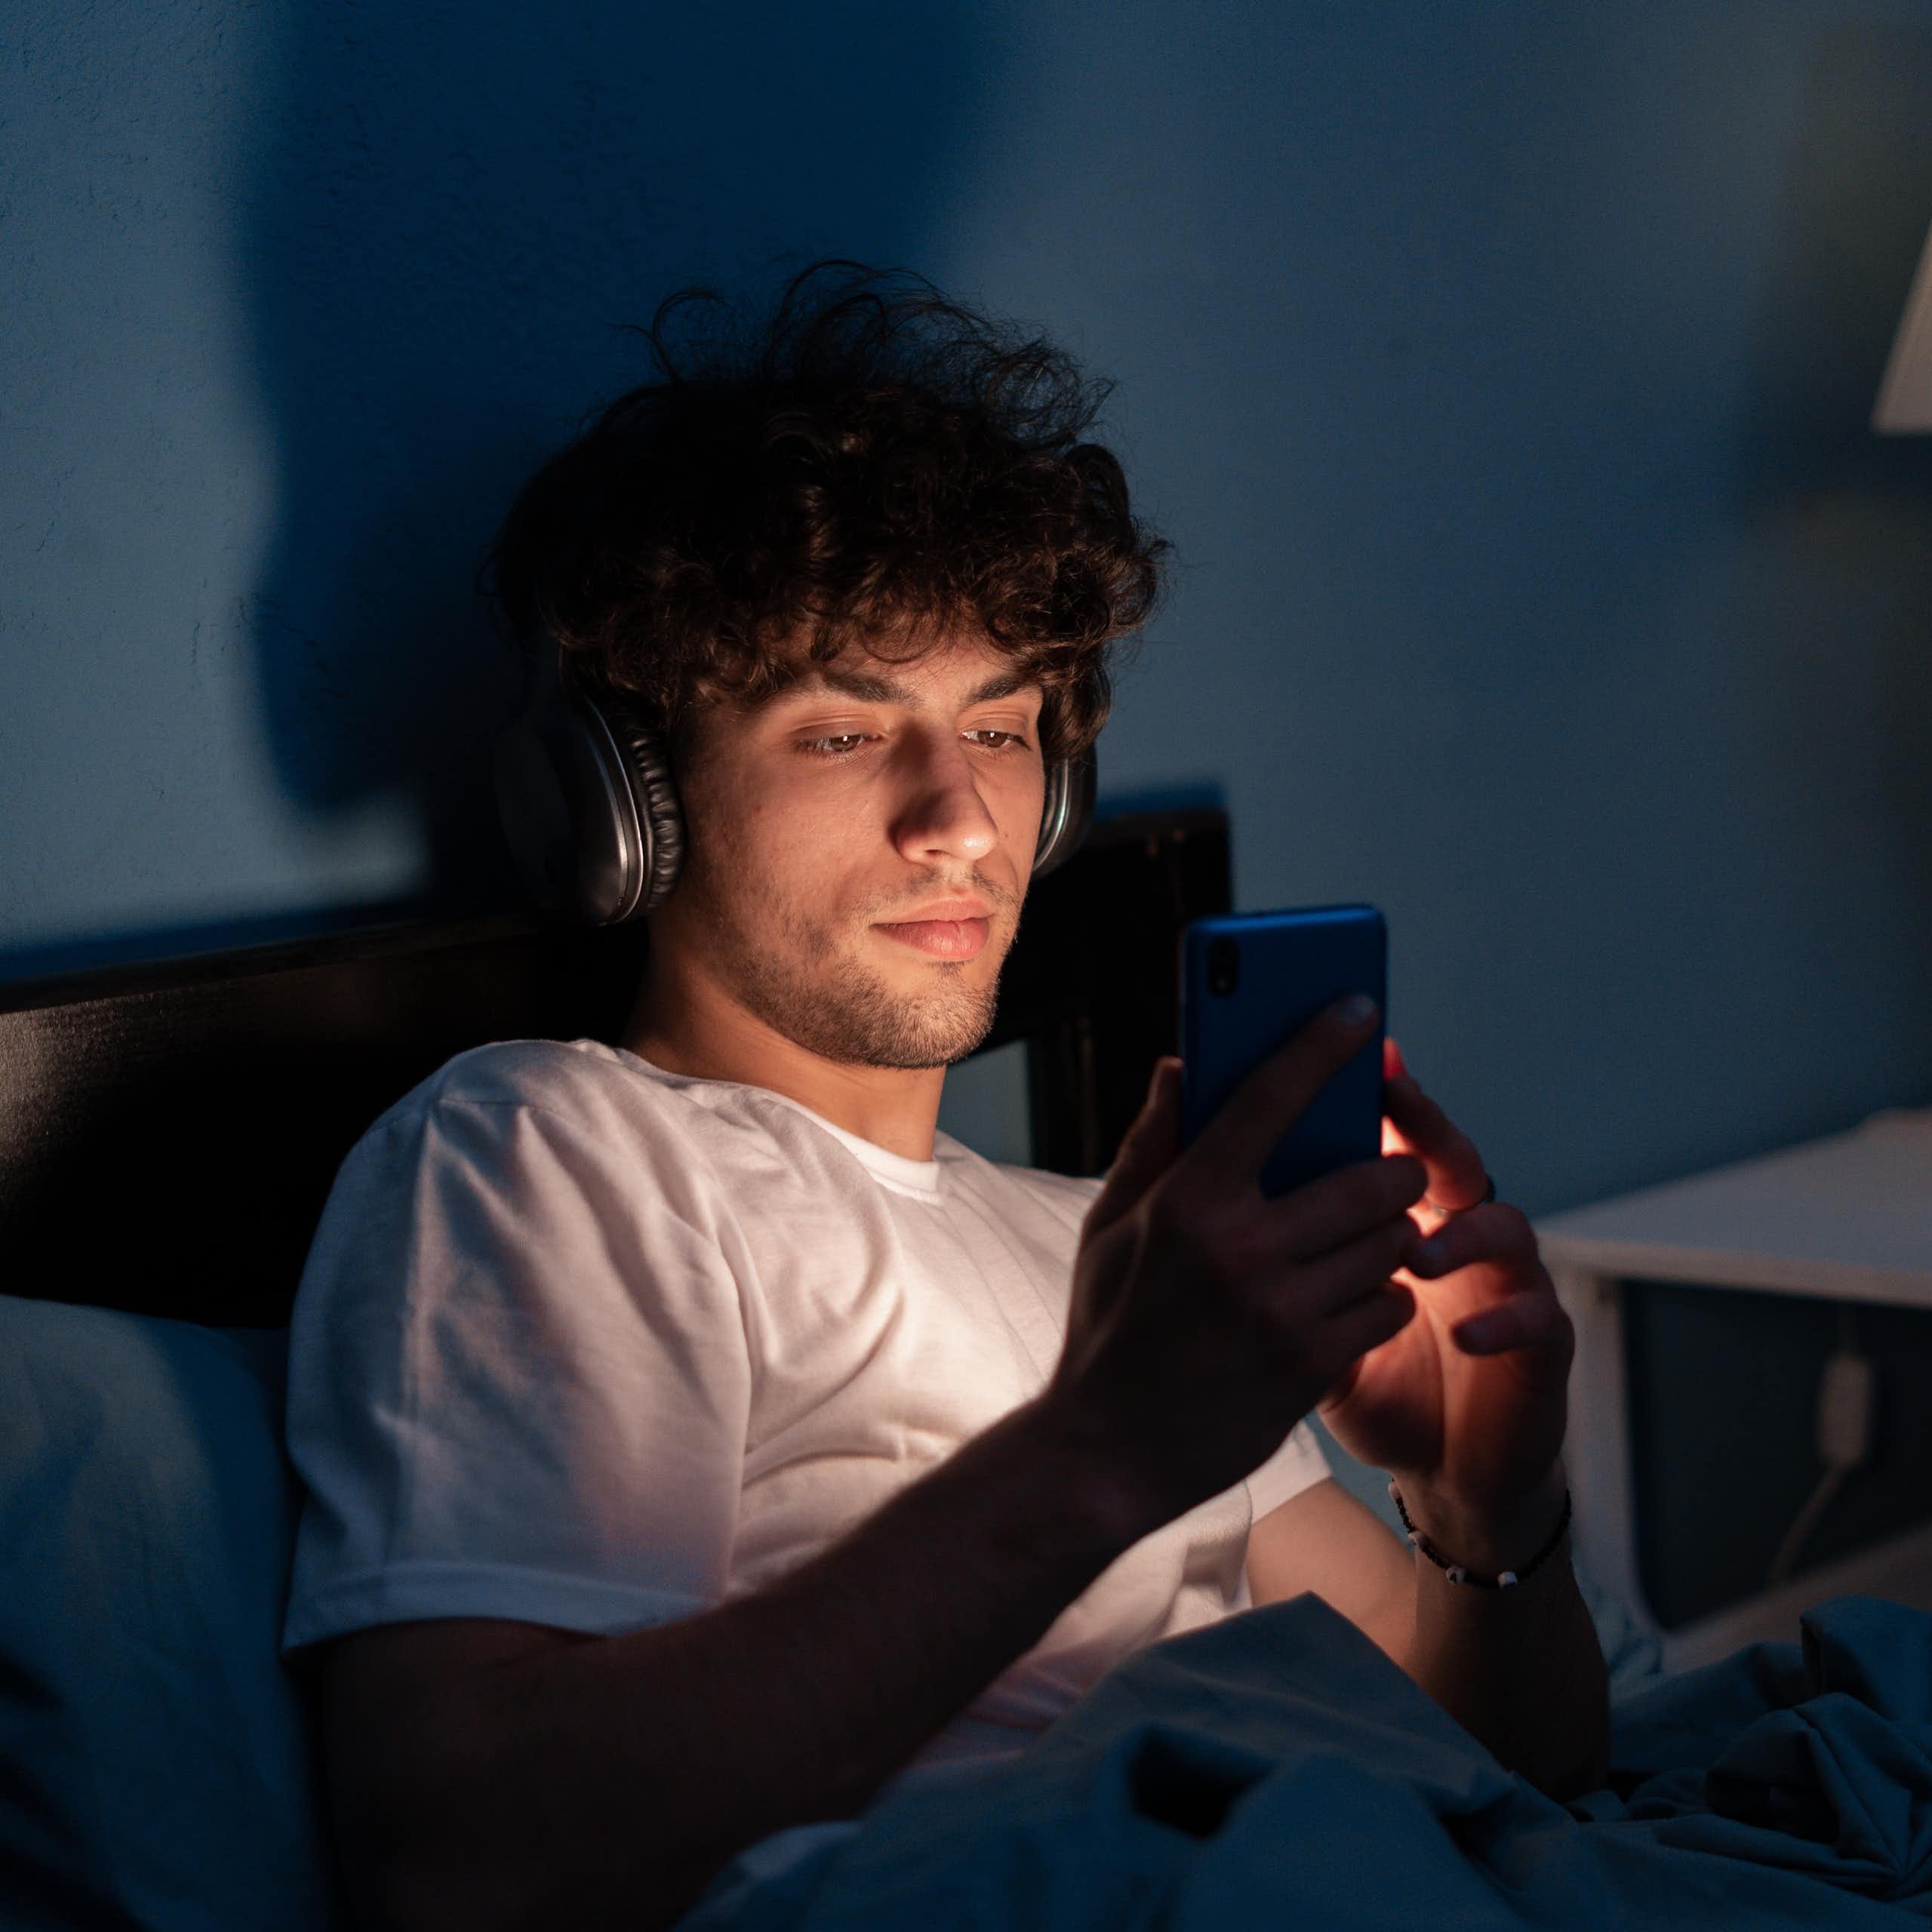 Man looking at phone screen in bed